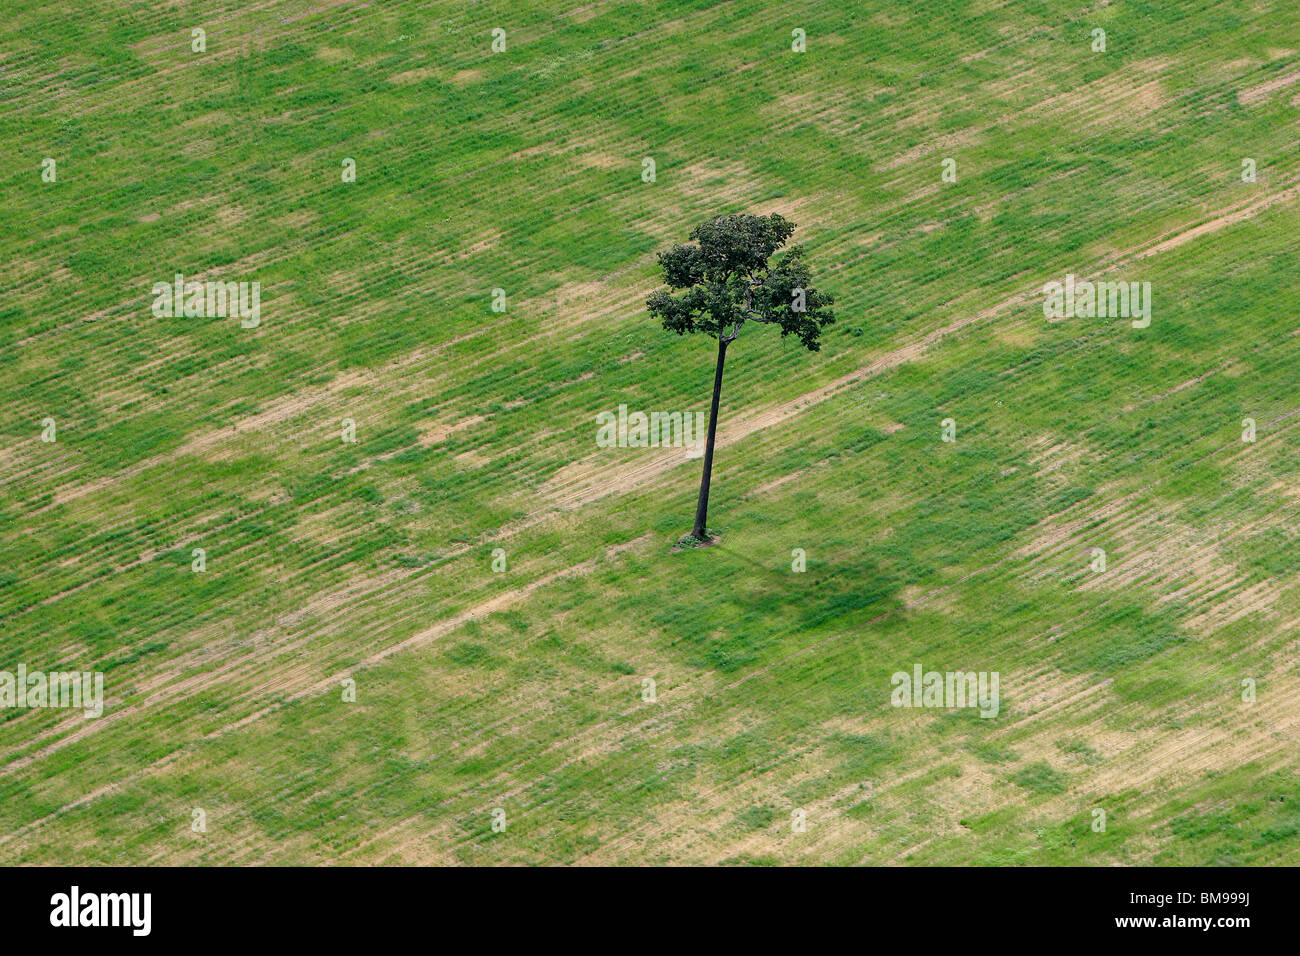 Soy plantation in Amazon rain forest, Brazil. Deforestation for the agribusiness. Isolated Brazil nut tree sentenced to death. Stock Photo